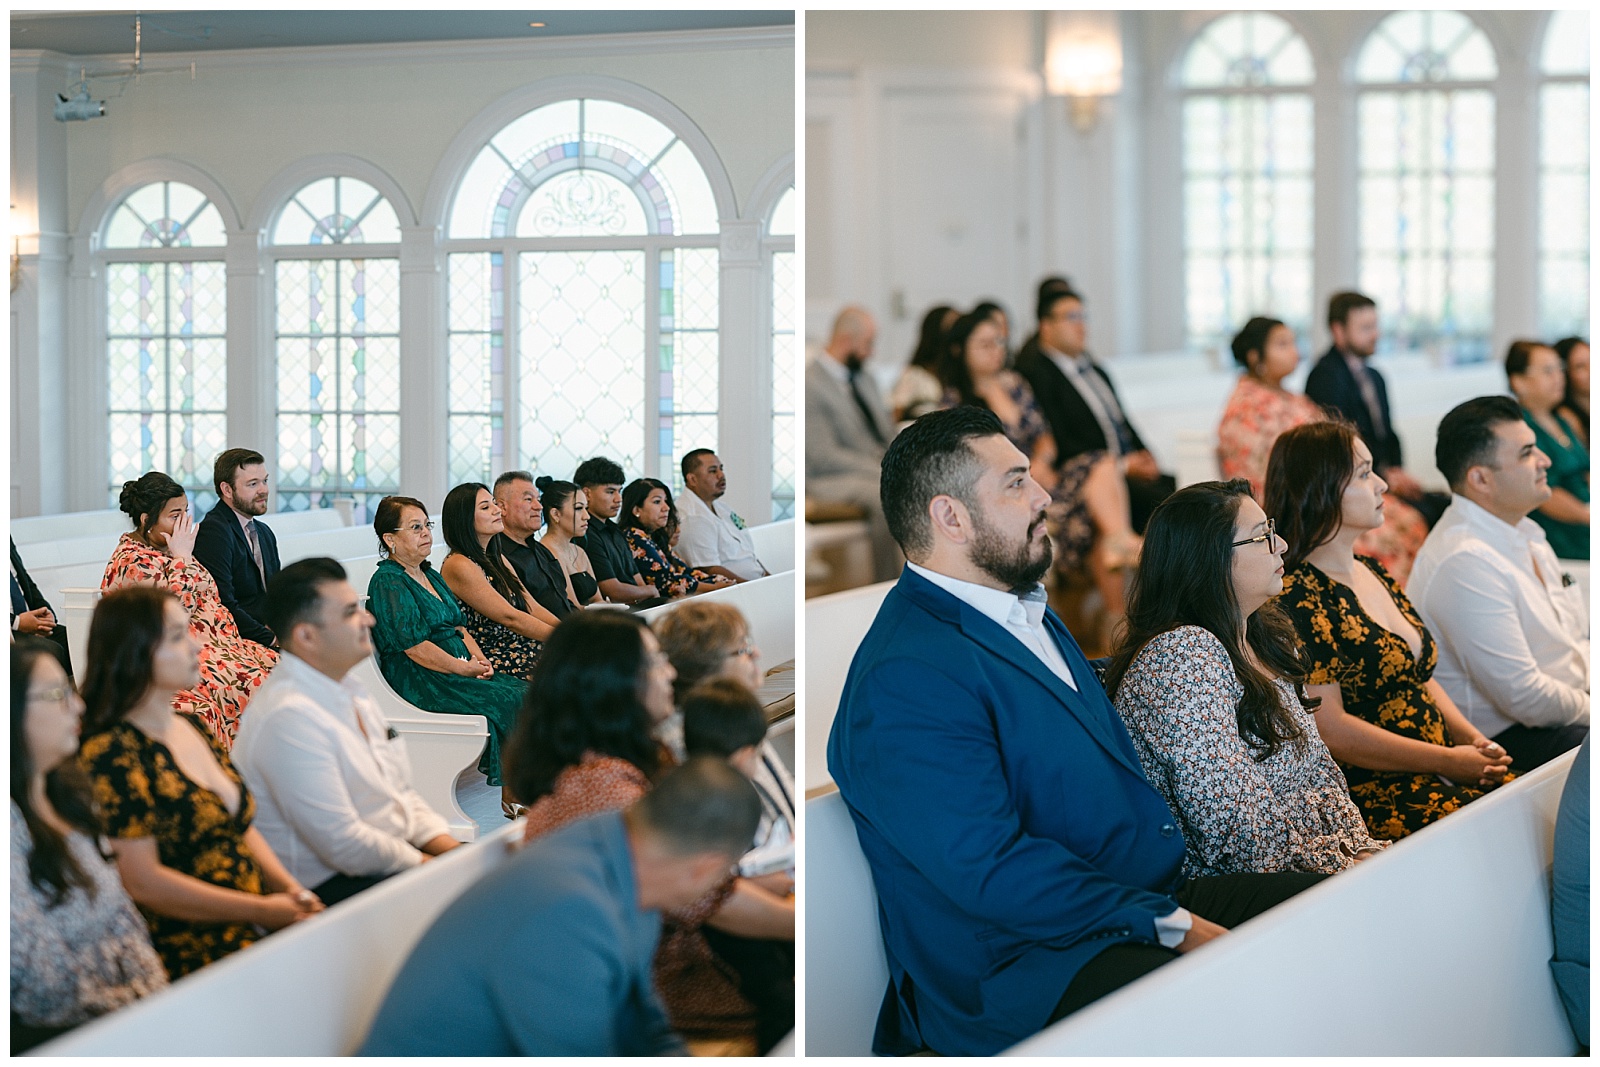 Guests watch the wedding ceremony at Disney's Wedding Pavilion by Elizabeth Kane Photography in Orlando Florida